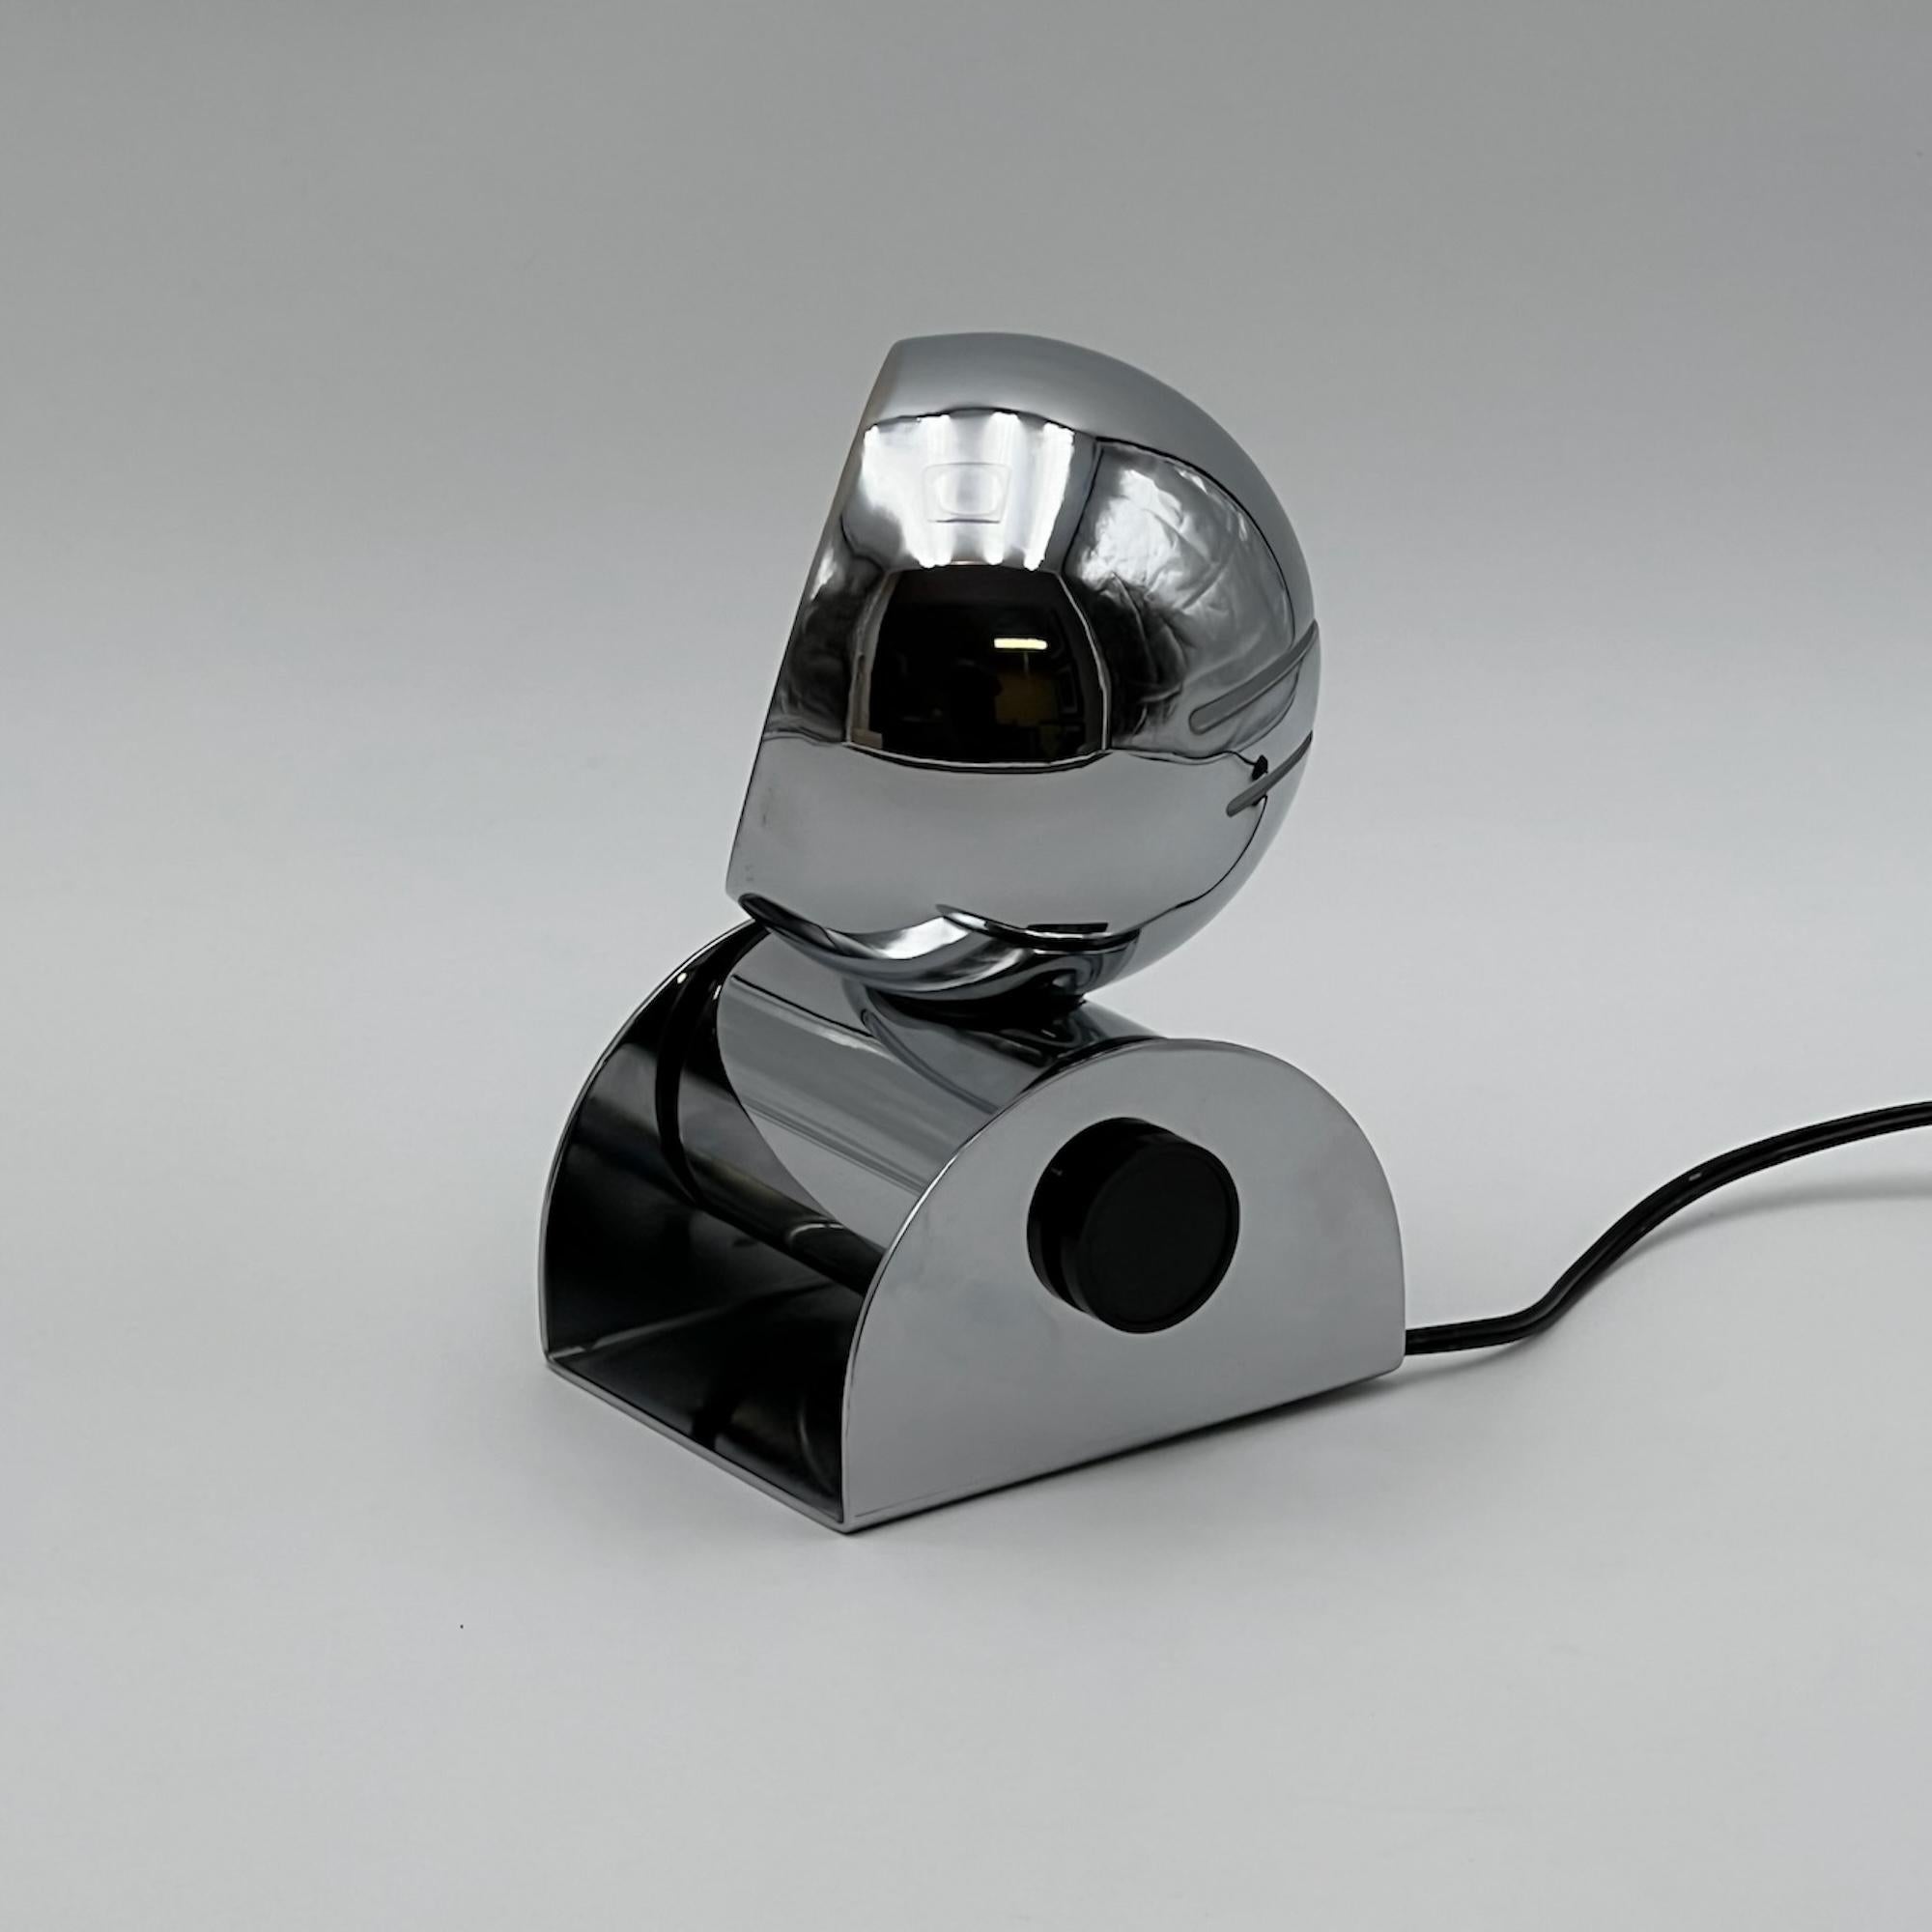 Space Age Eyeball Lamp in Chrome Metal by Tronconi, 1970s For Sale 1